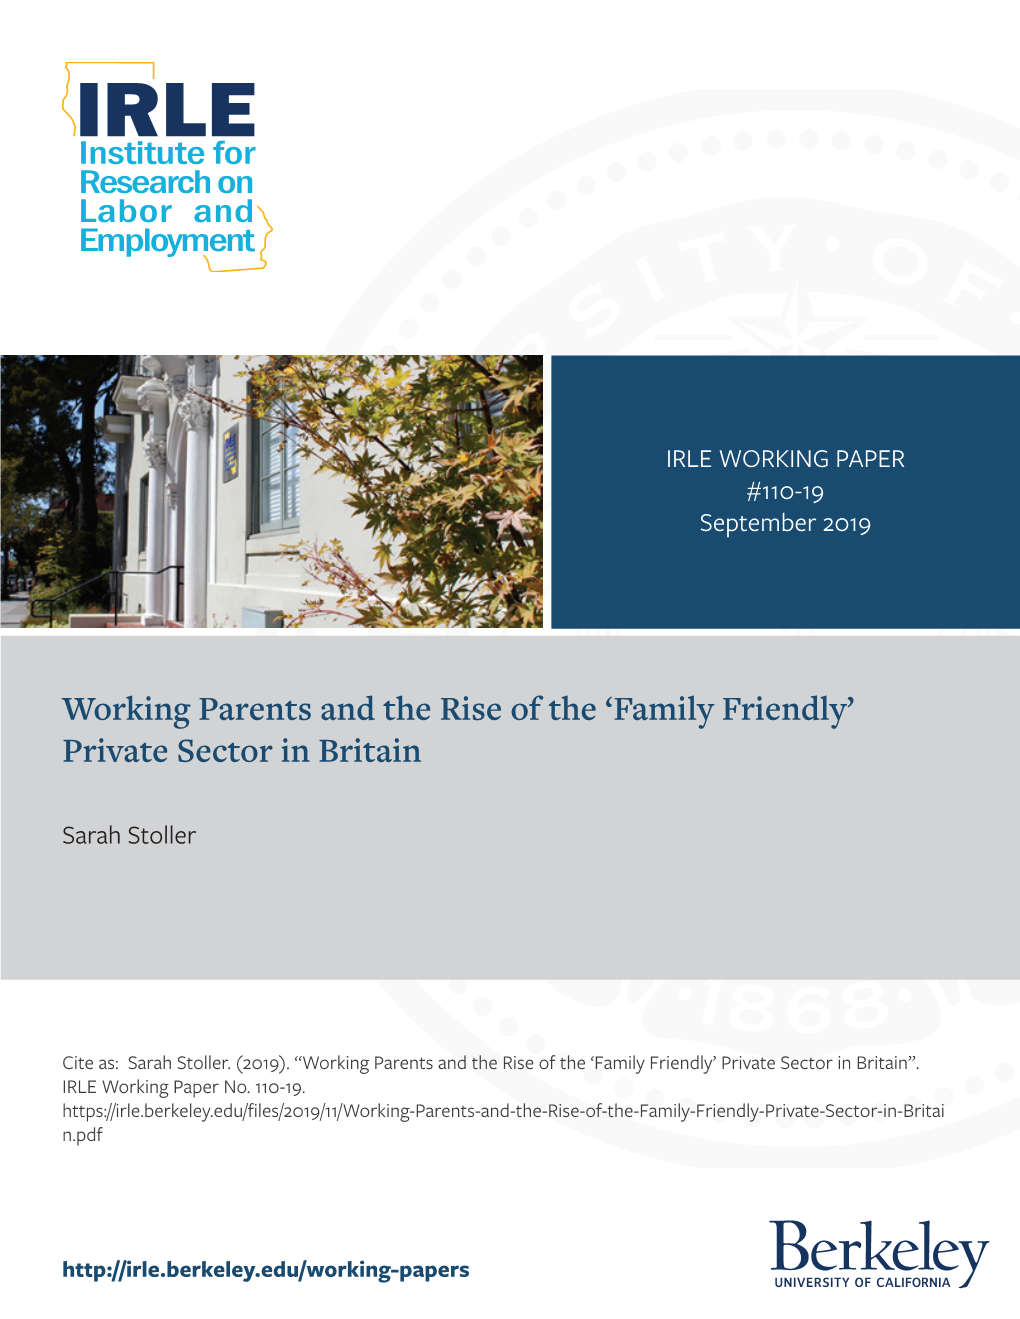 Working Parents and the Rise of the 'Family Friendly' Private Sector In